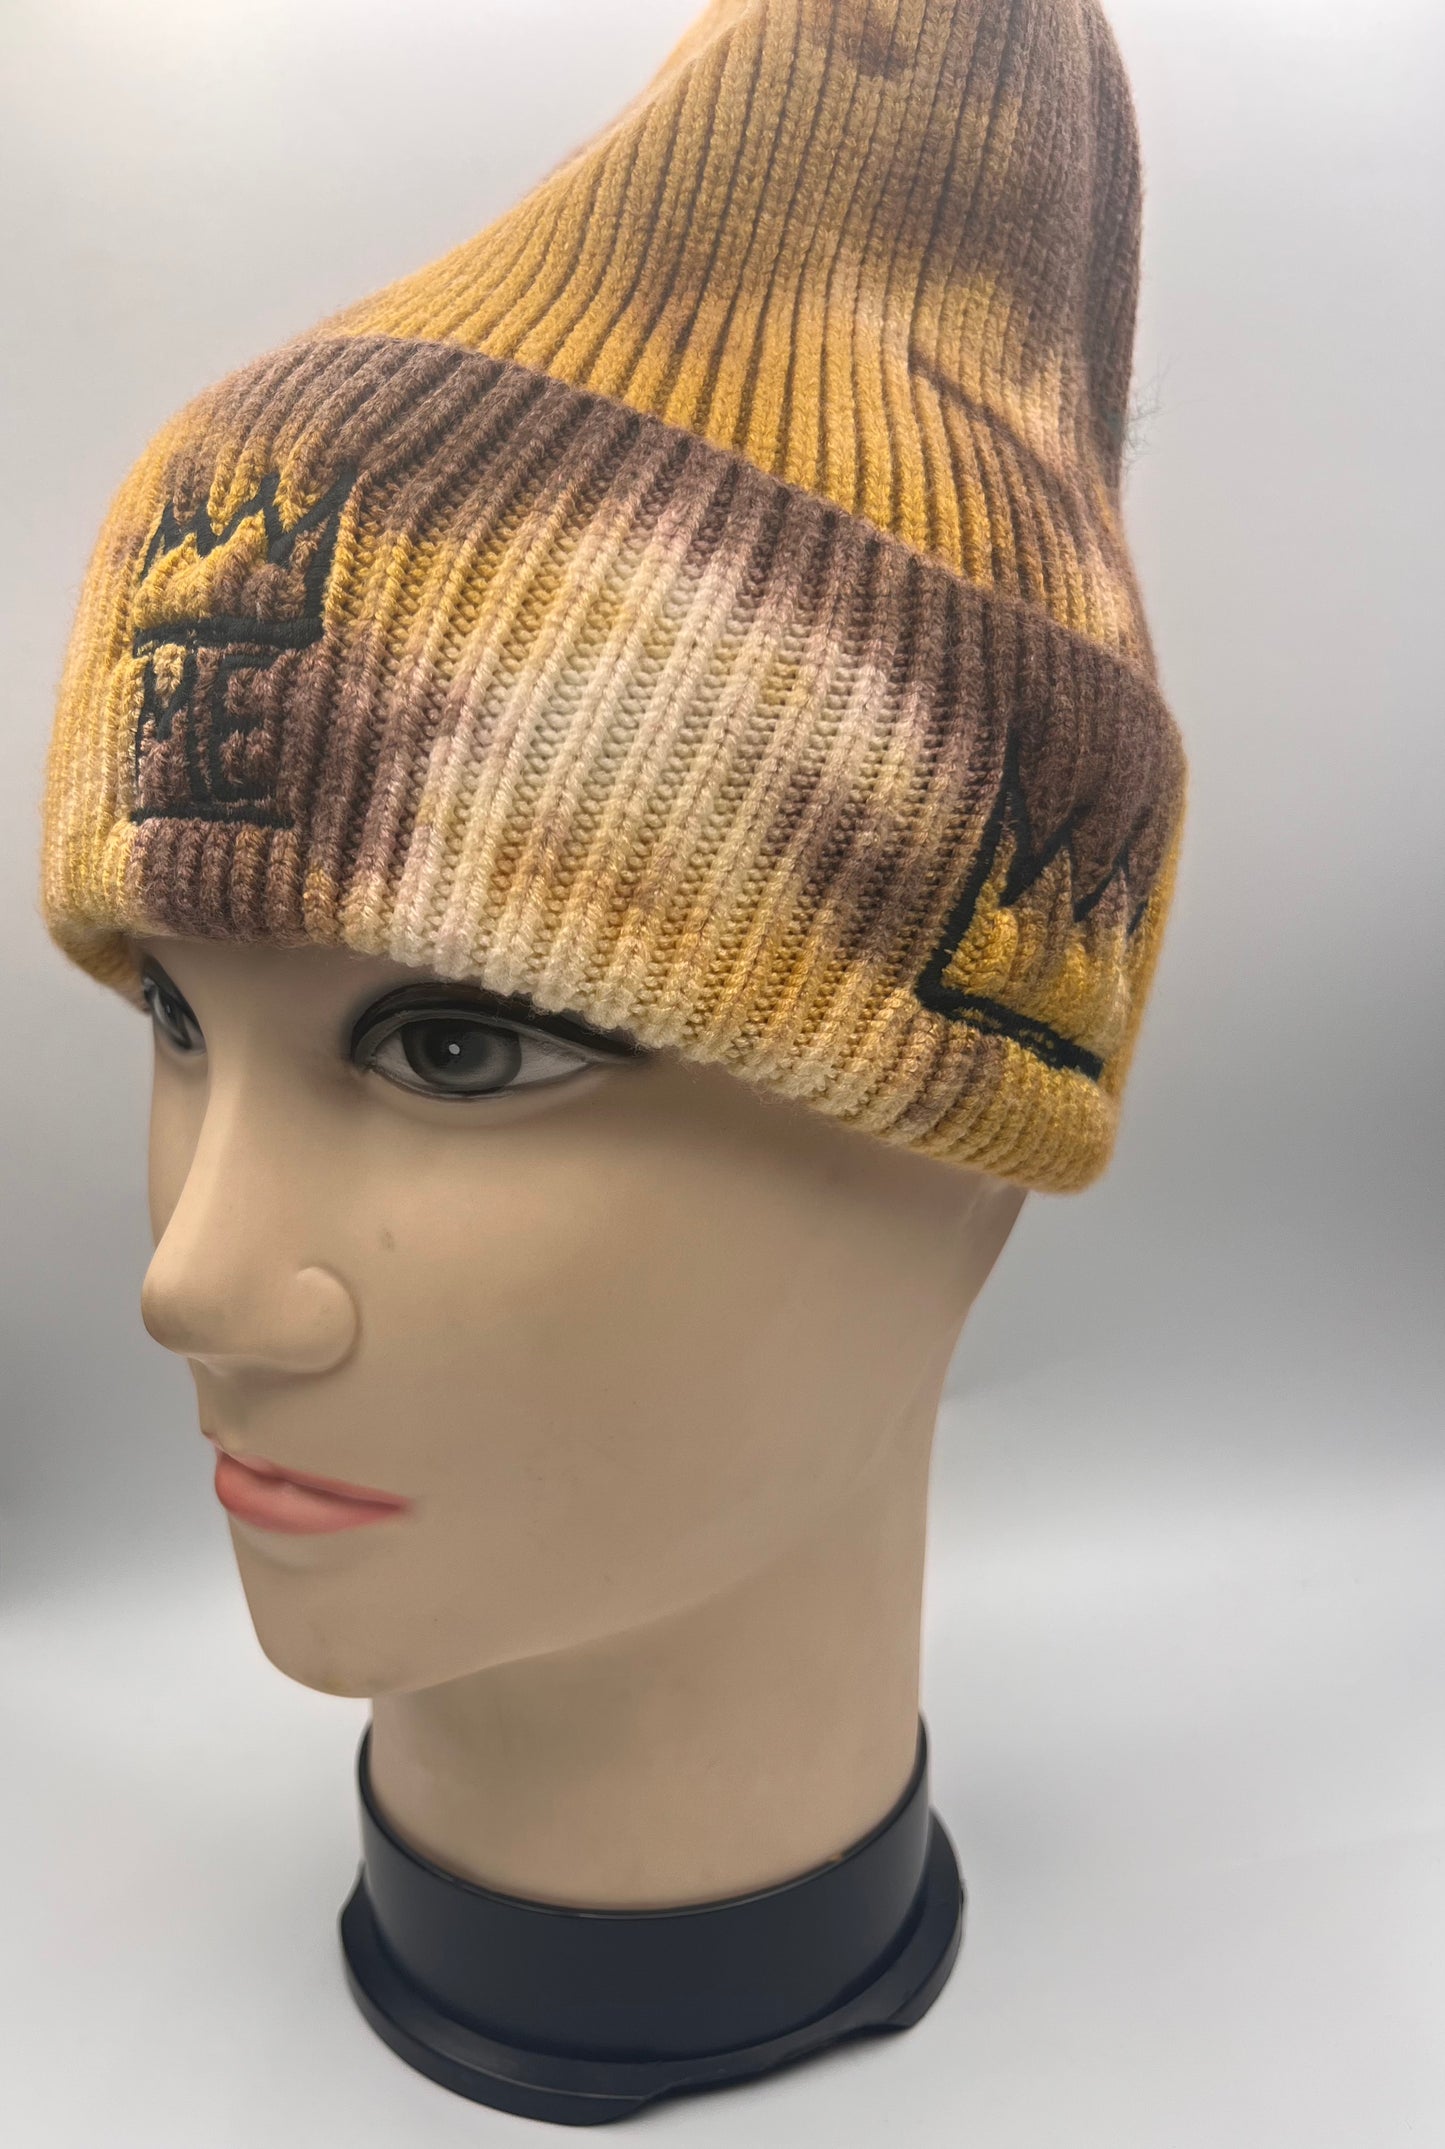 Brown and Tan Beanie with Black Krown